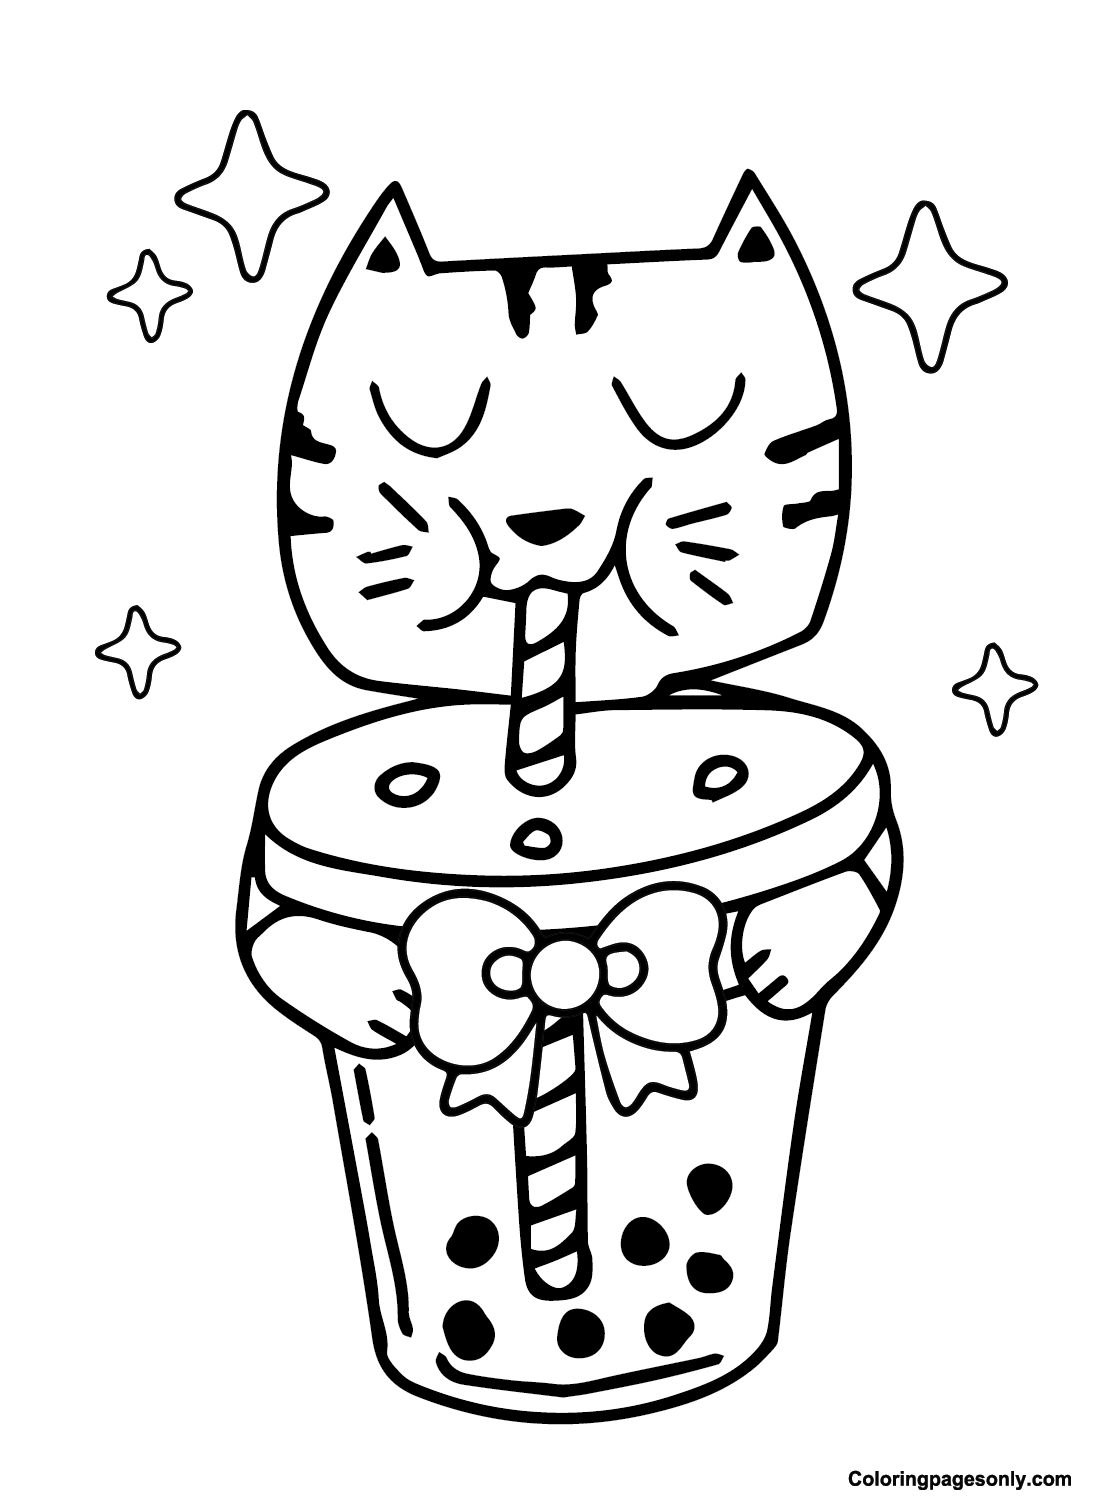 Pictures Boba Tea Coloring Pages